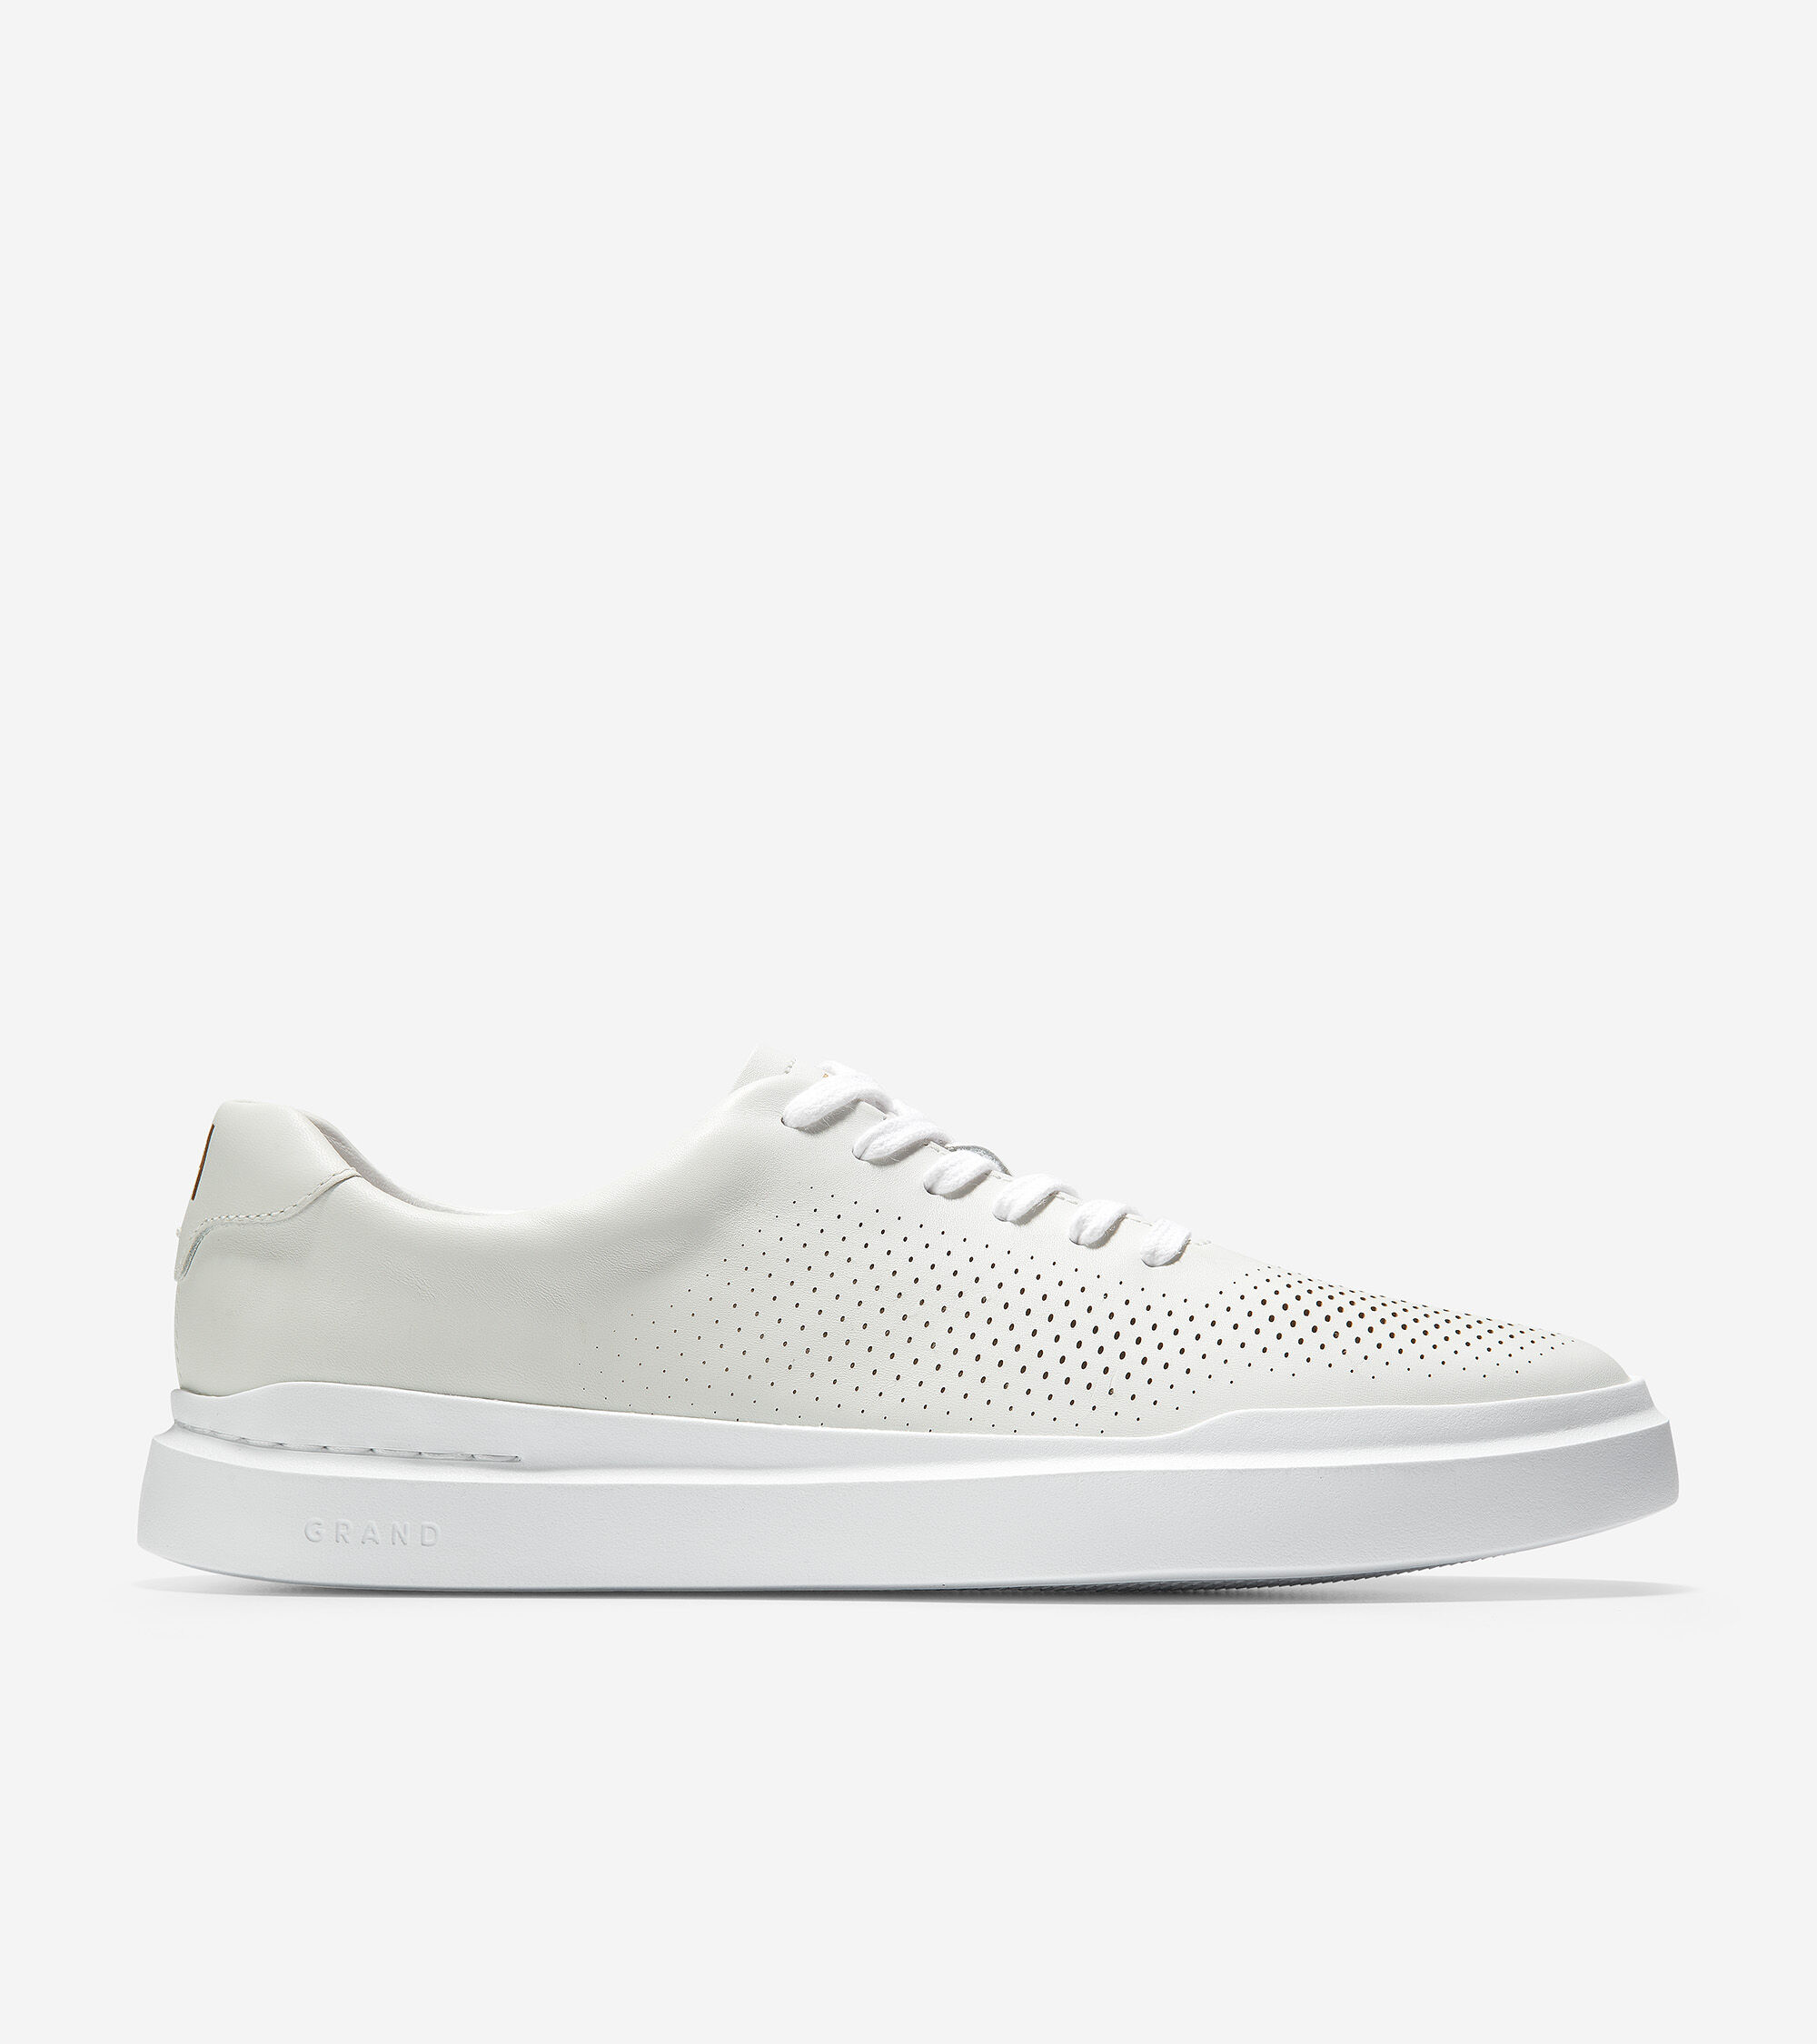 mens cole haan white sneakers